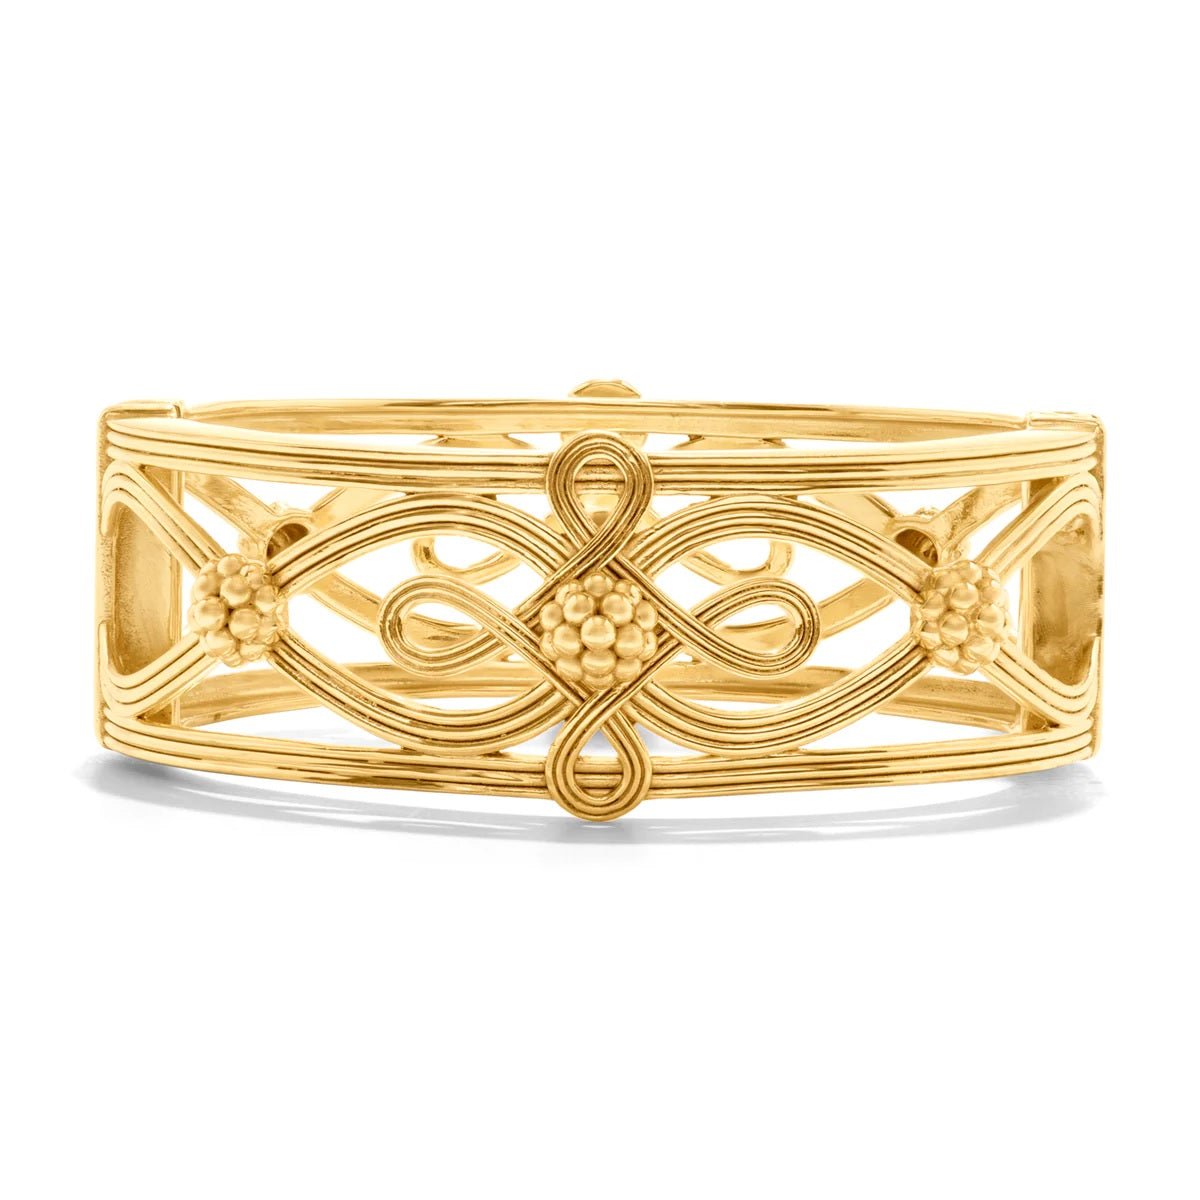 Monique Gold Hinged Bangle - Gaines Jewelers